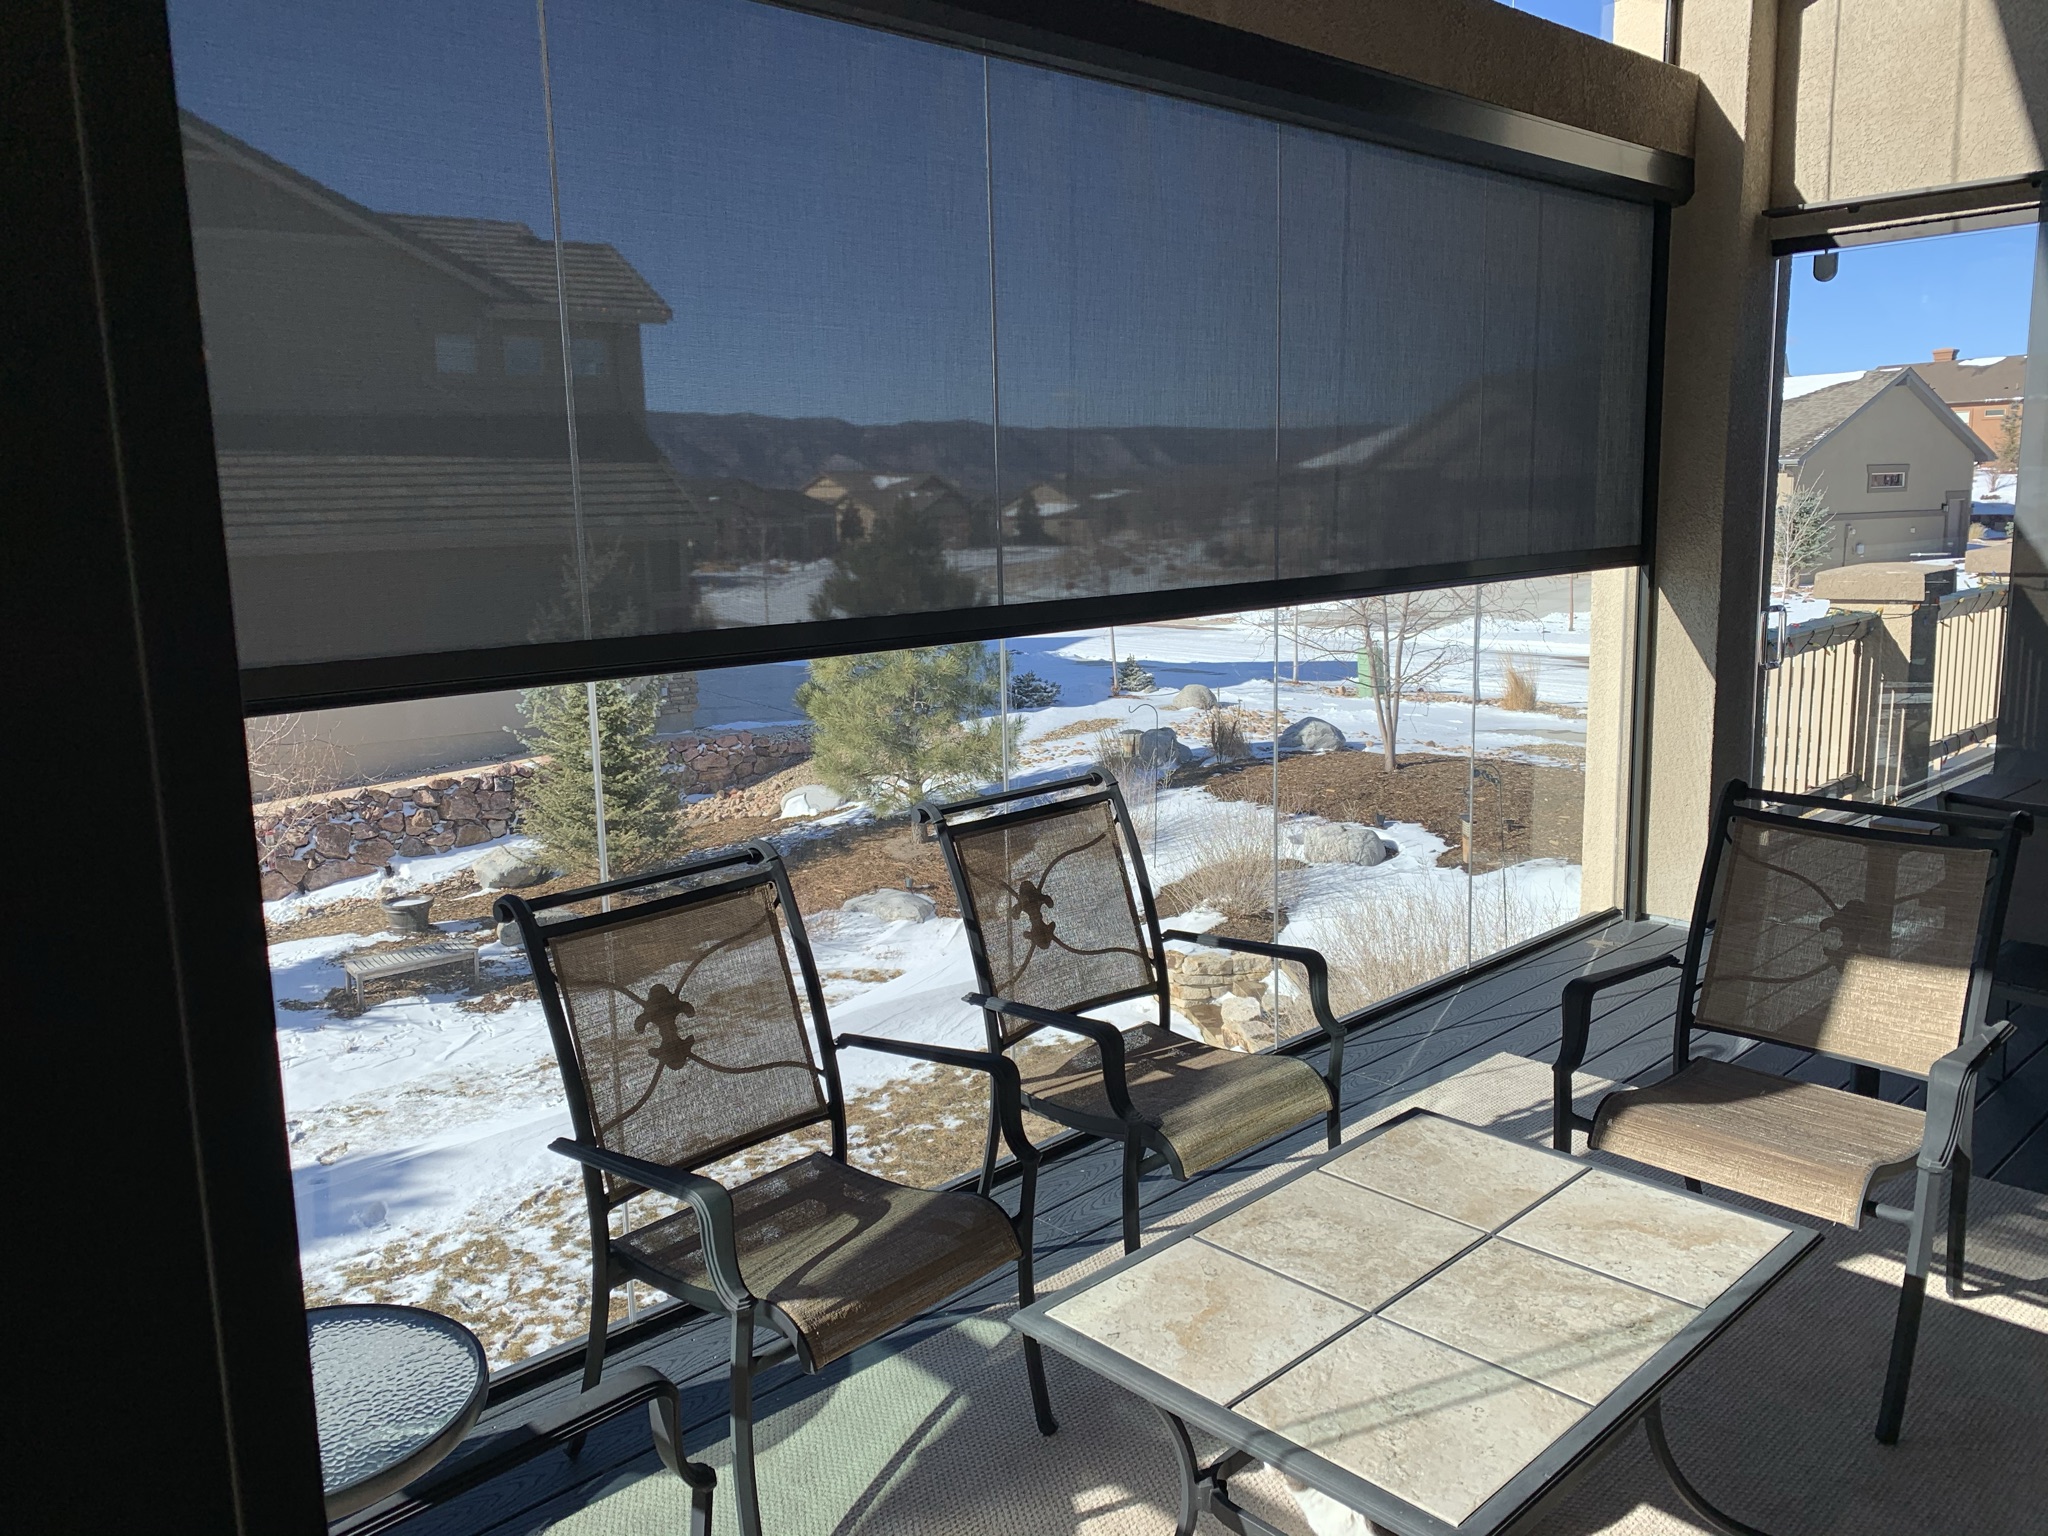 Drop down shades installed in a glass 3-season room allow for privacy